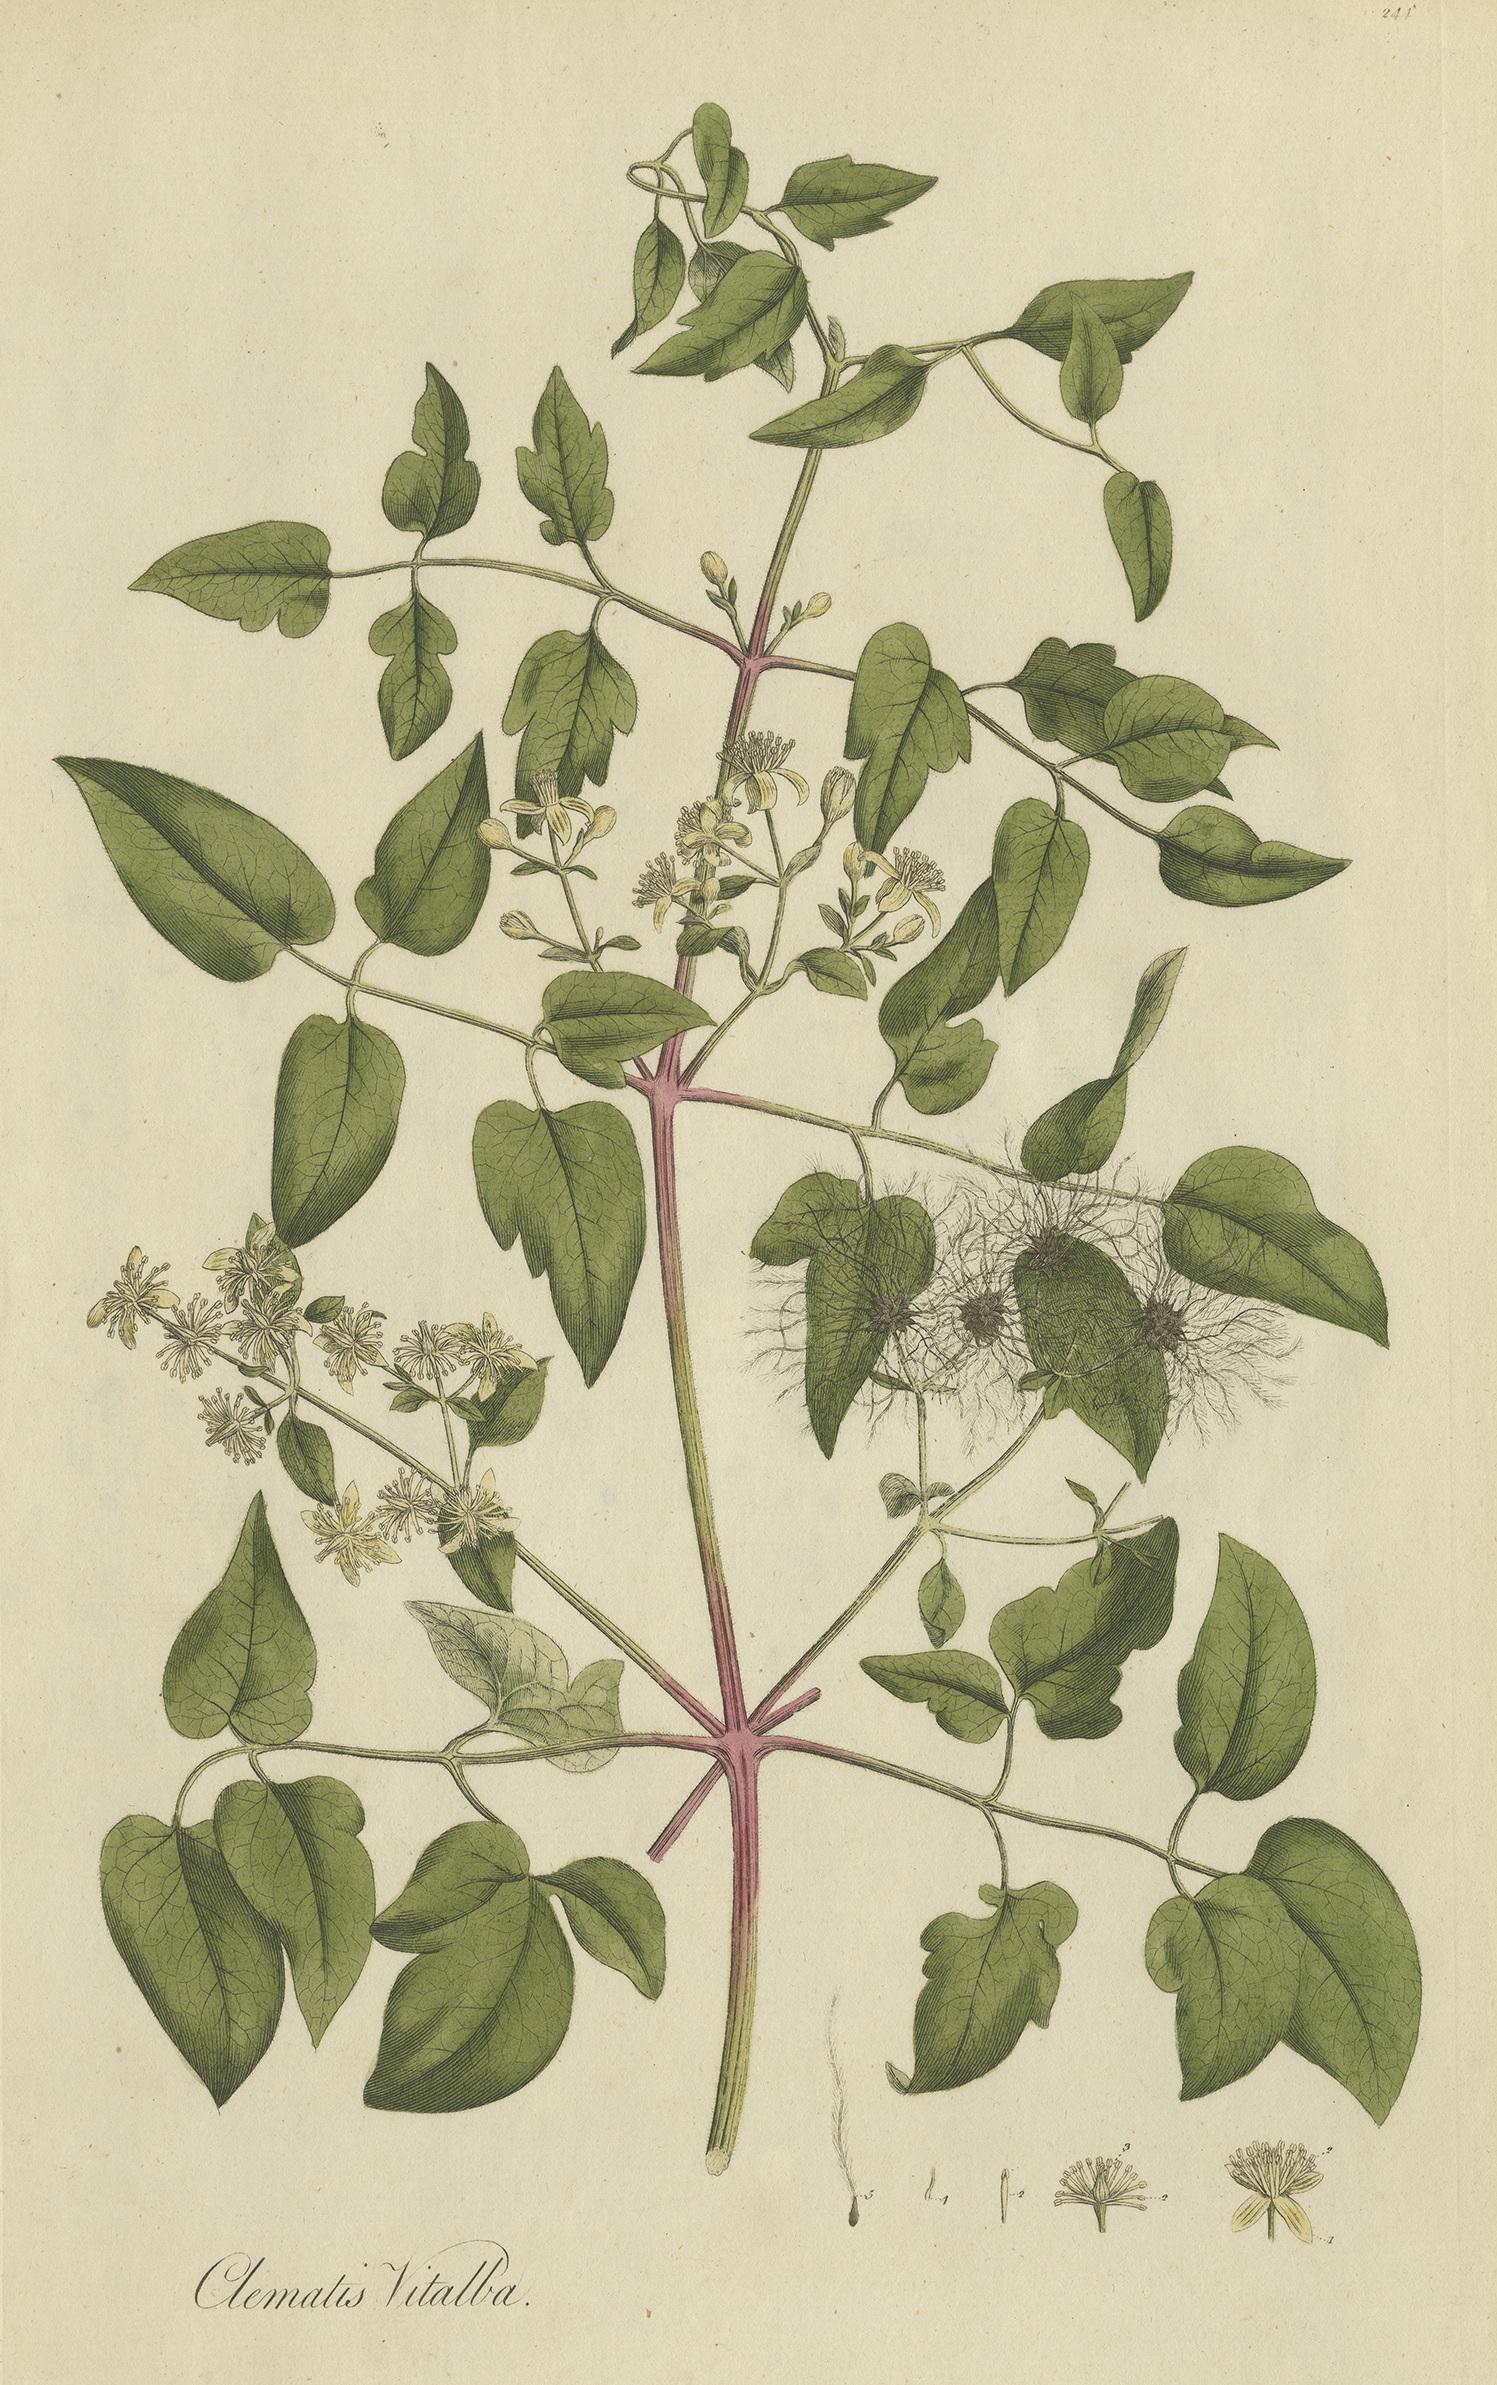 Antique botany print titled 'Clematis Vitalba'. Hand colored engraving of the clematis vitalba, also known as old man's beard and traveller's joy. This print originates from 'Flora Londinensis' by William Curtis.